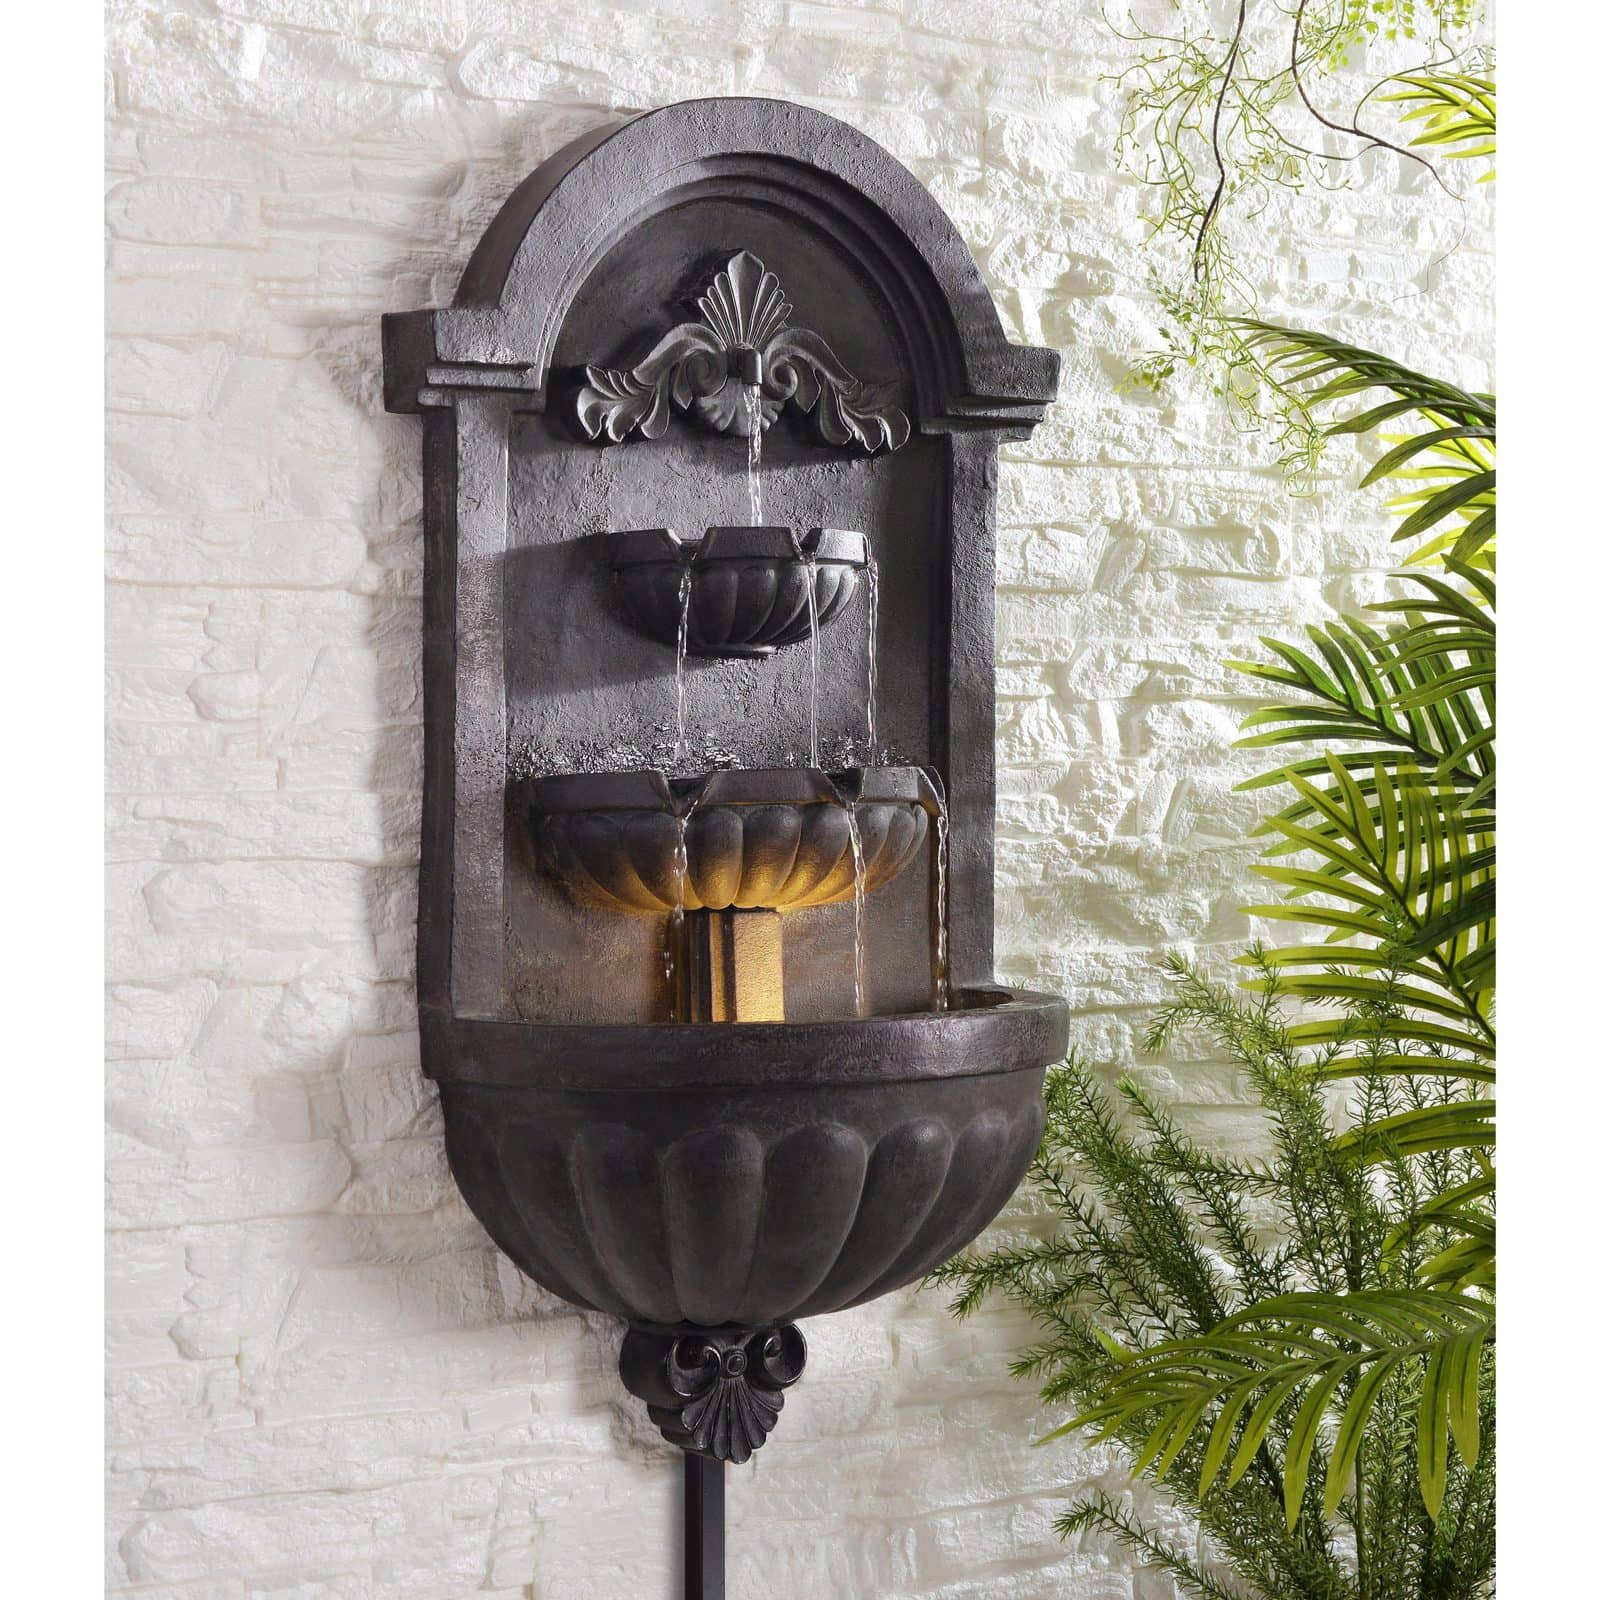 Bring Peace to Your Space with a Wall Fountain